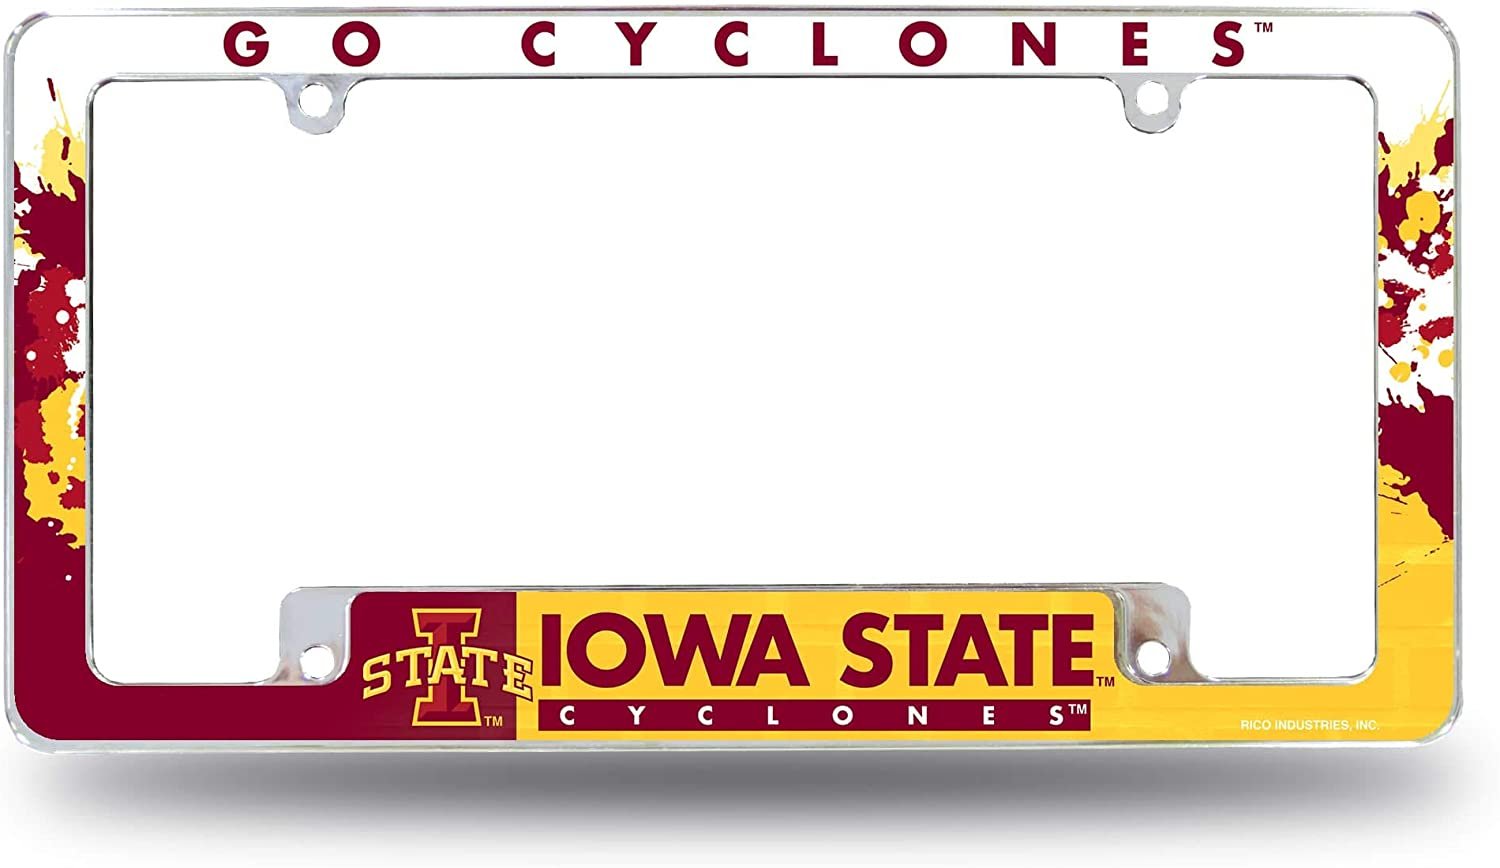 Iowa State Cyclones University Metal License Plate Frame Tag Cover All Over Design